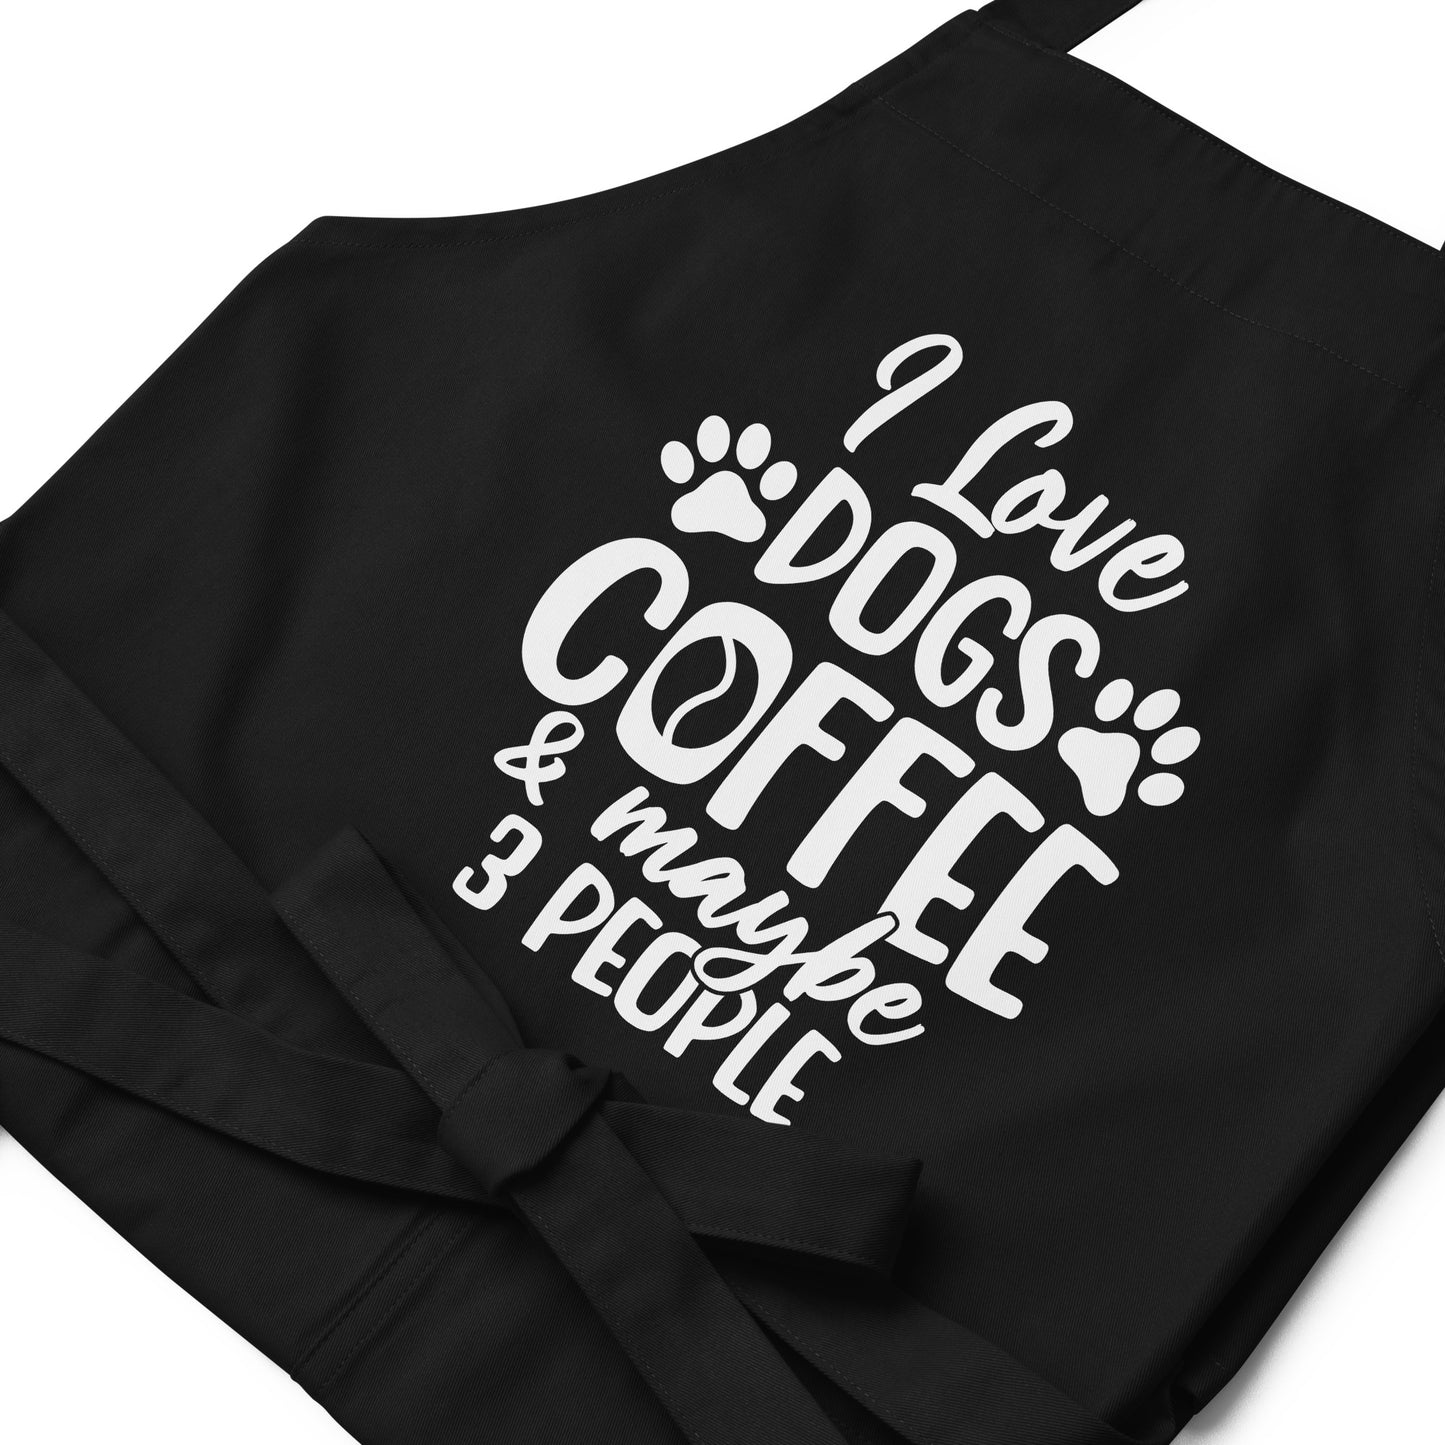 I Love Dogs Coffee & Maybe 3 People Organic cotton apron